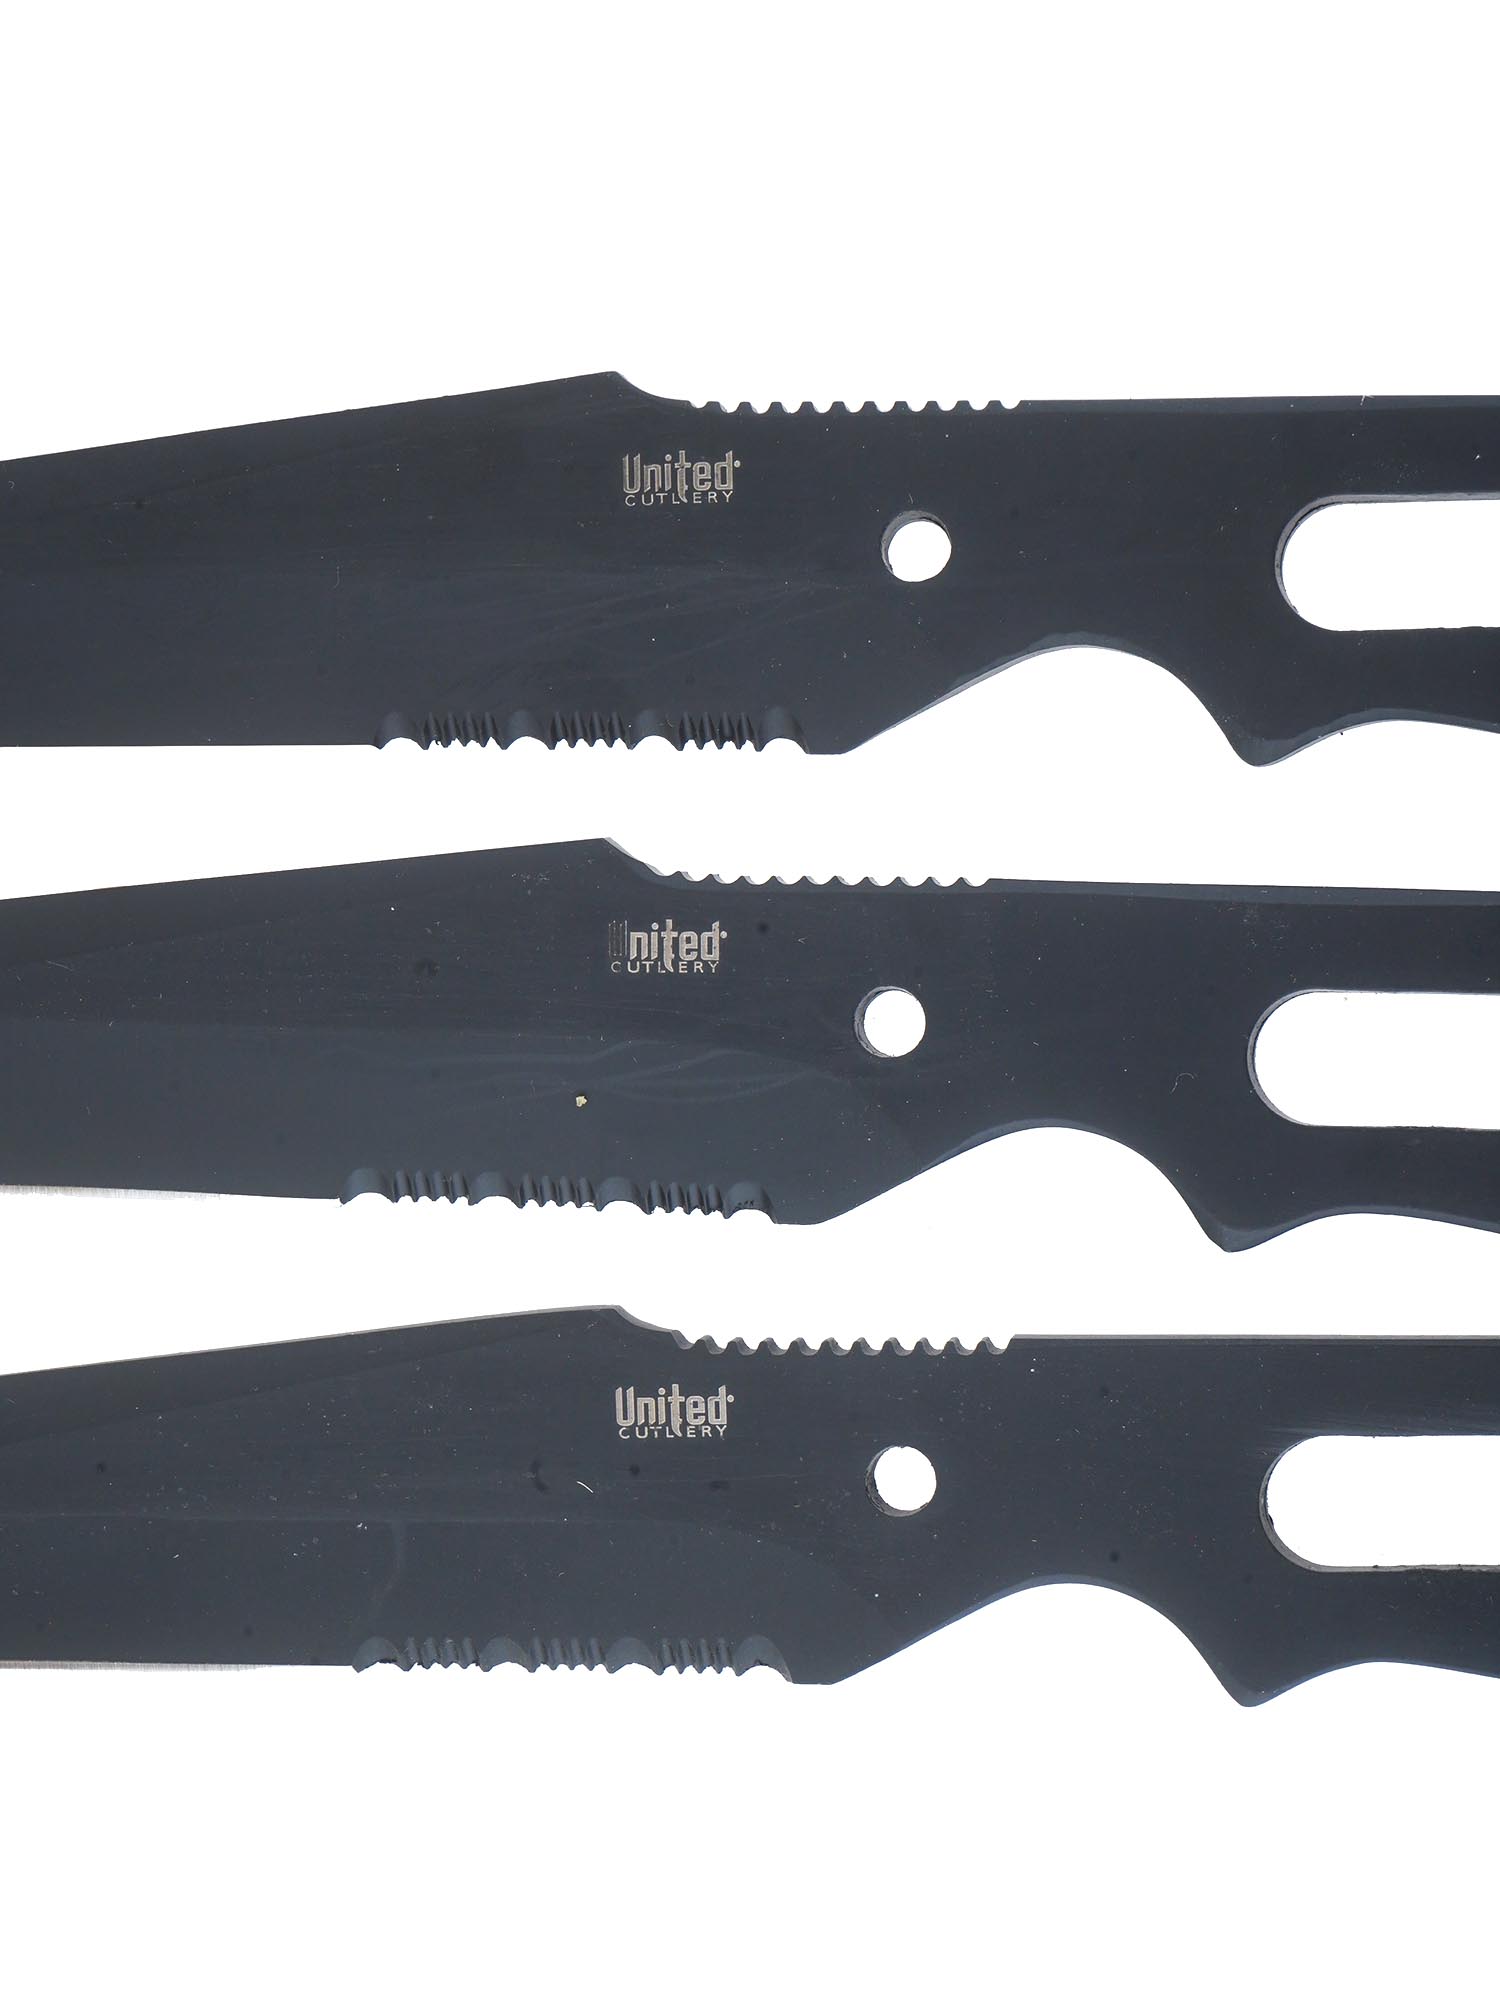 3 UNITED CUTLERY SLIM PROFILE COVERT OPS KNIVES PIC-4